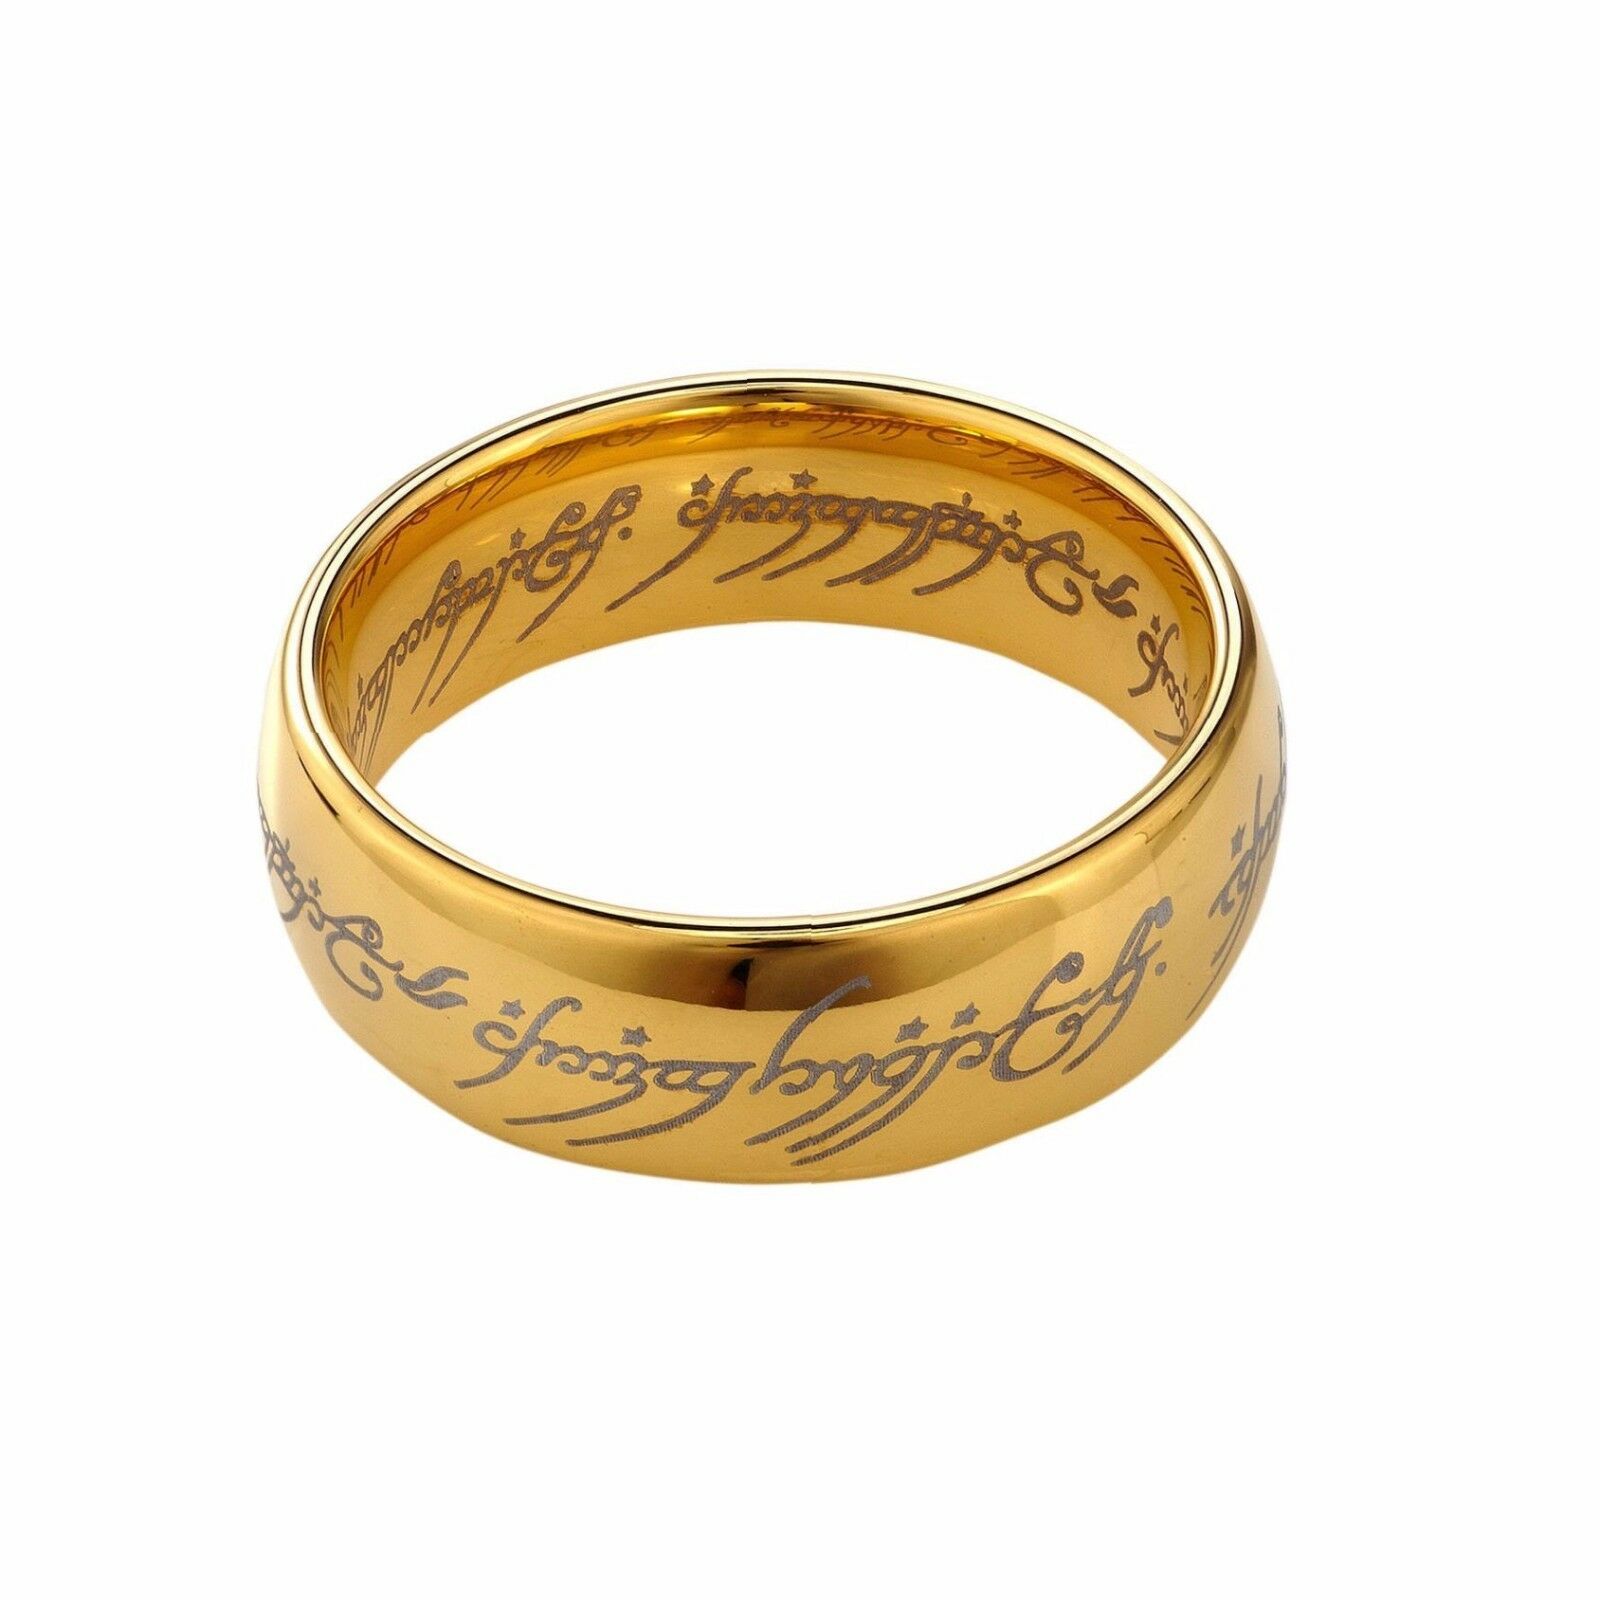 what is written on the lord of the rings ring